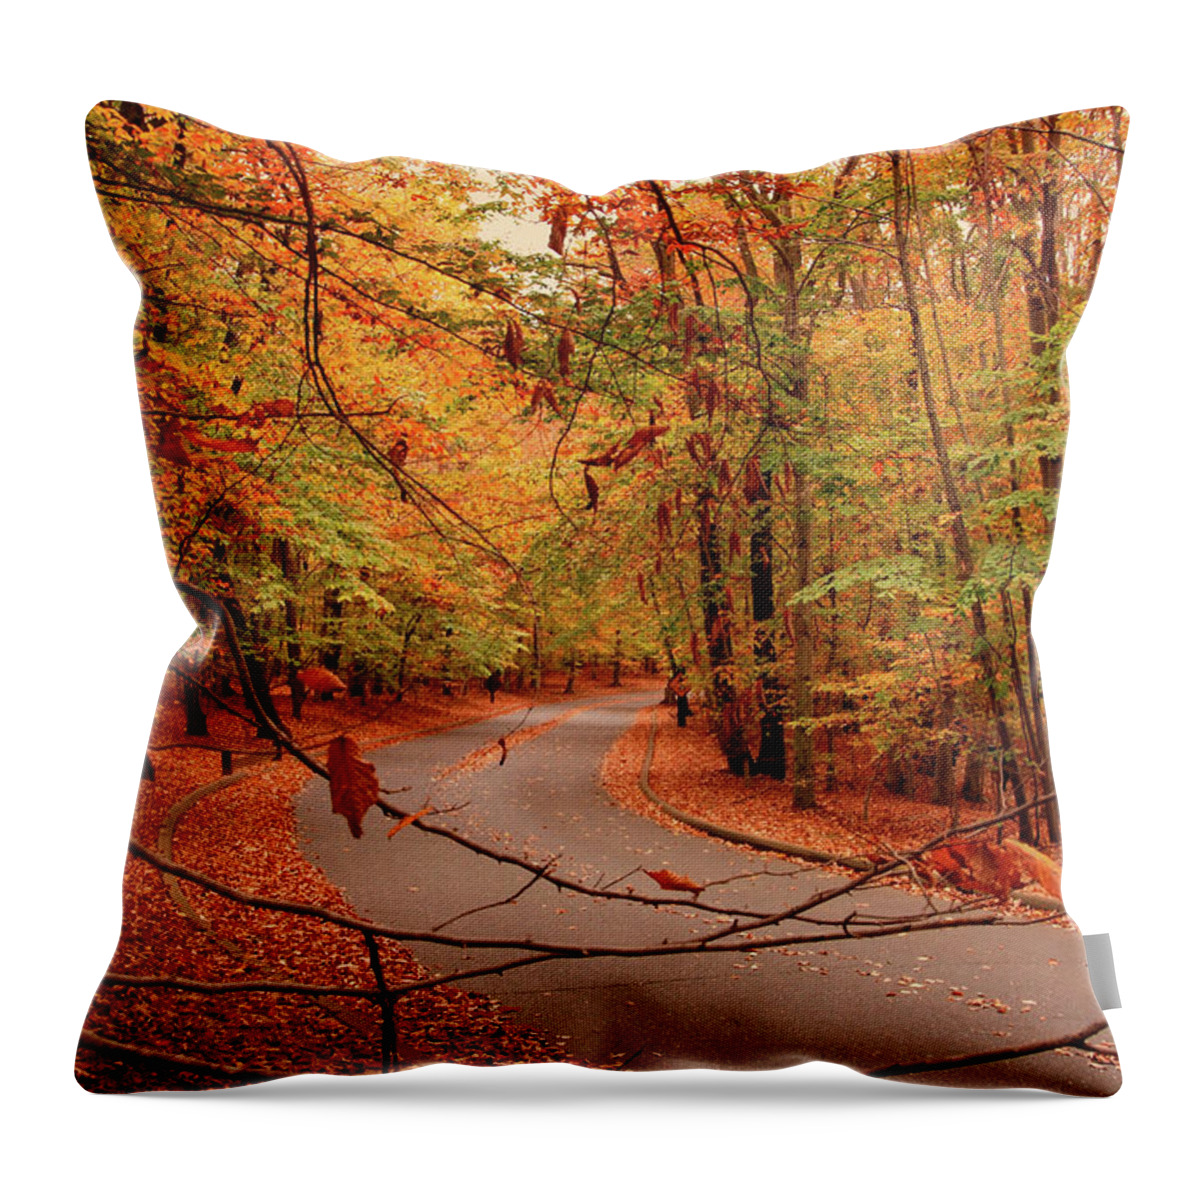 Autumn Throw Pillow featuring the photograph Autumn In Holmdel Park by Angie Tirado